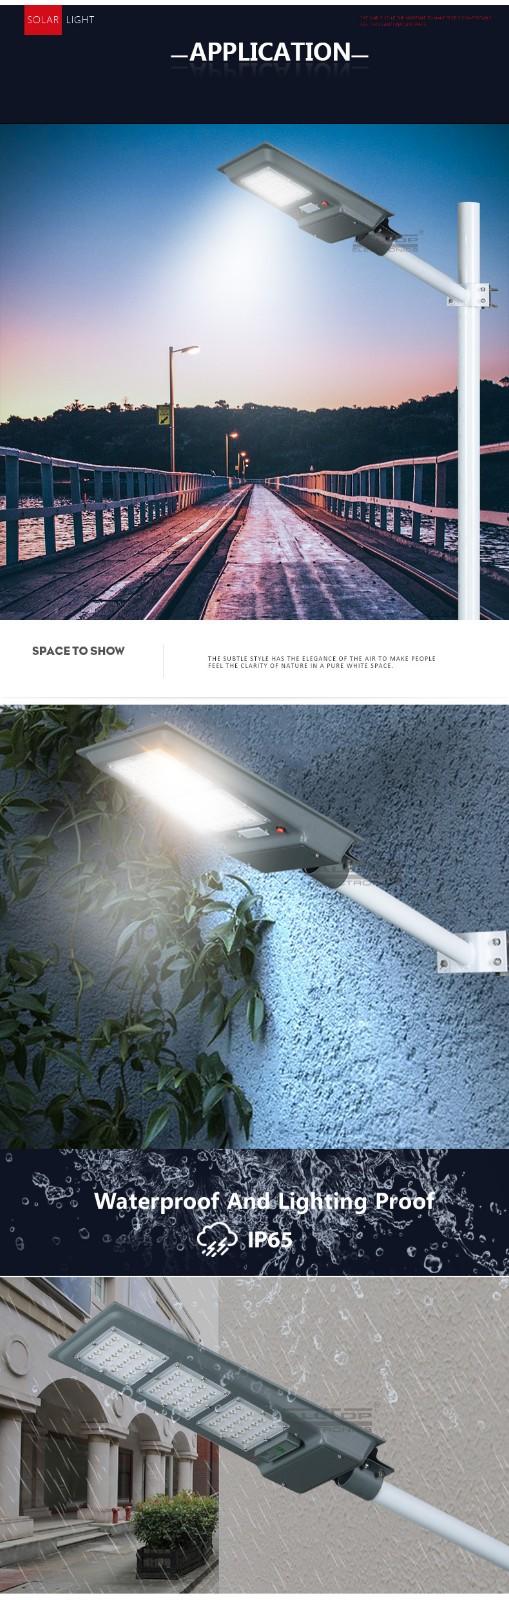 adjustable all in one street light directly sale for highway